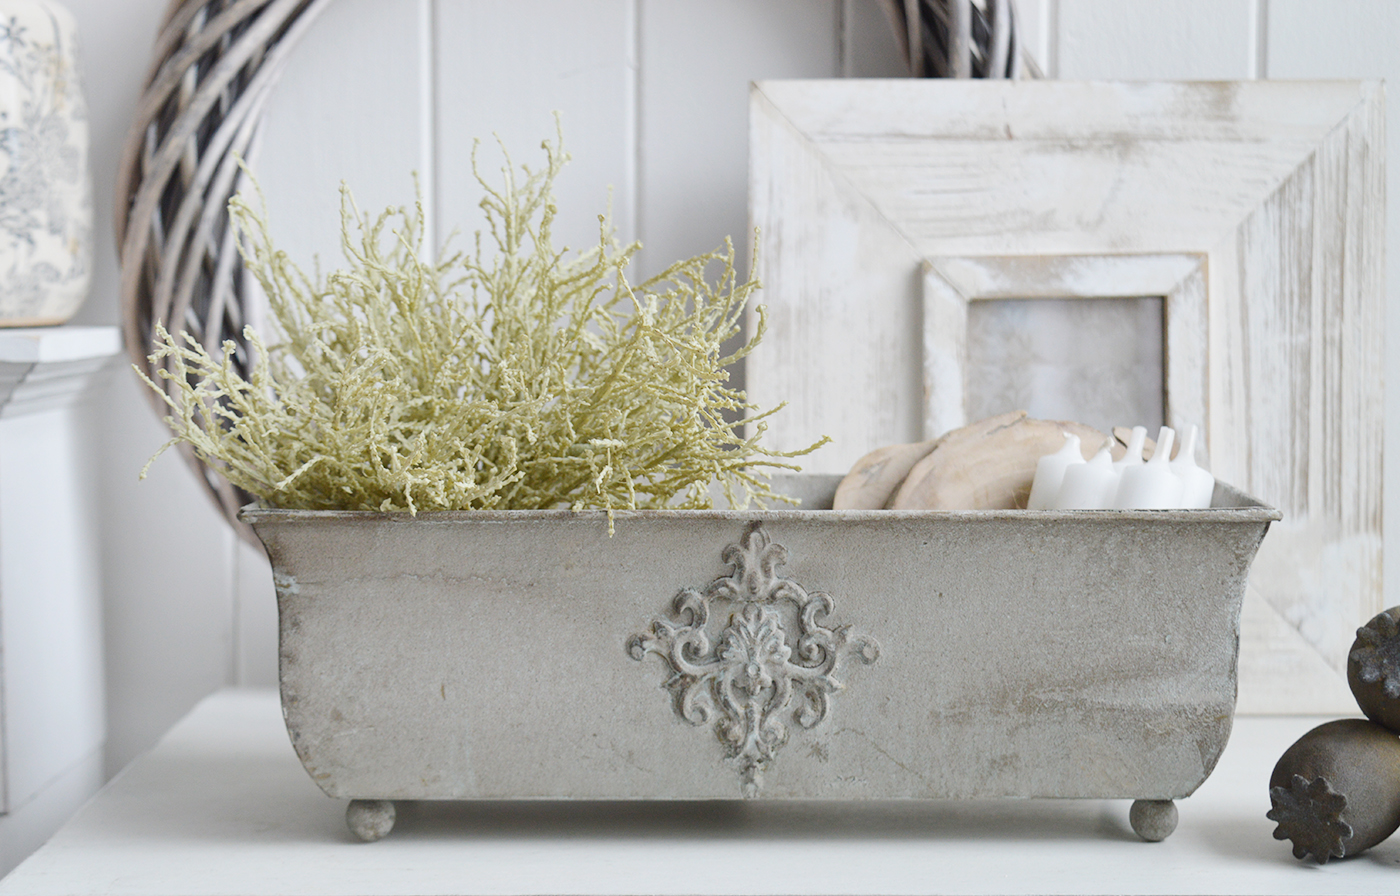 White Furniture and accessories for the home. Farmington Metal Planter - New England Shelf Styling for New England, farmhouse Country and coastal home interior decor